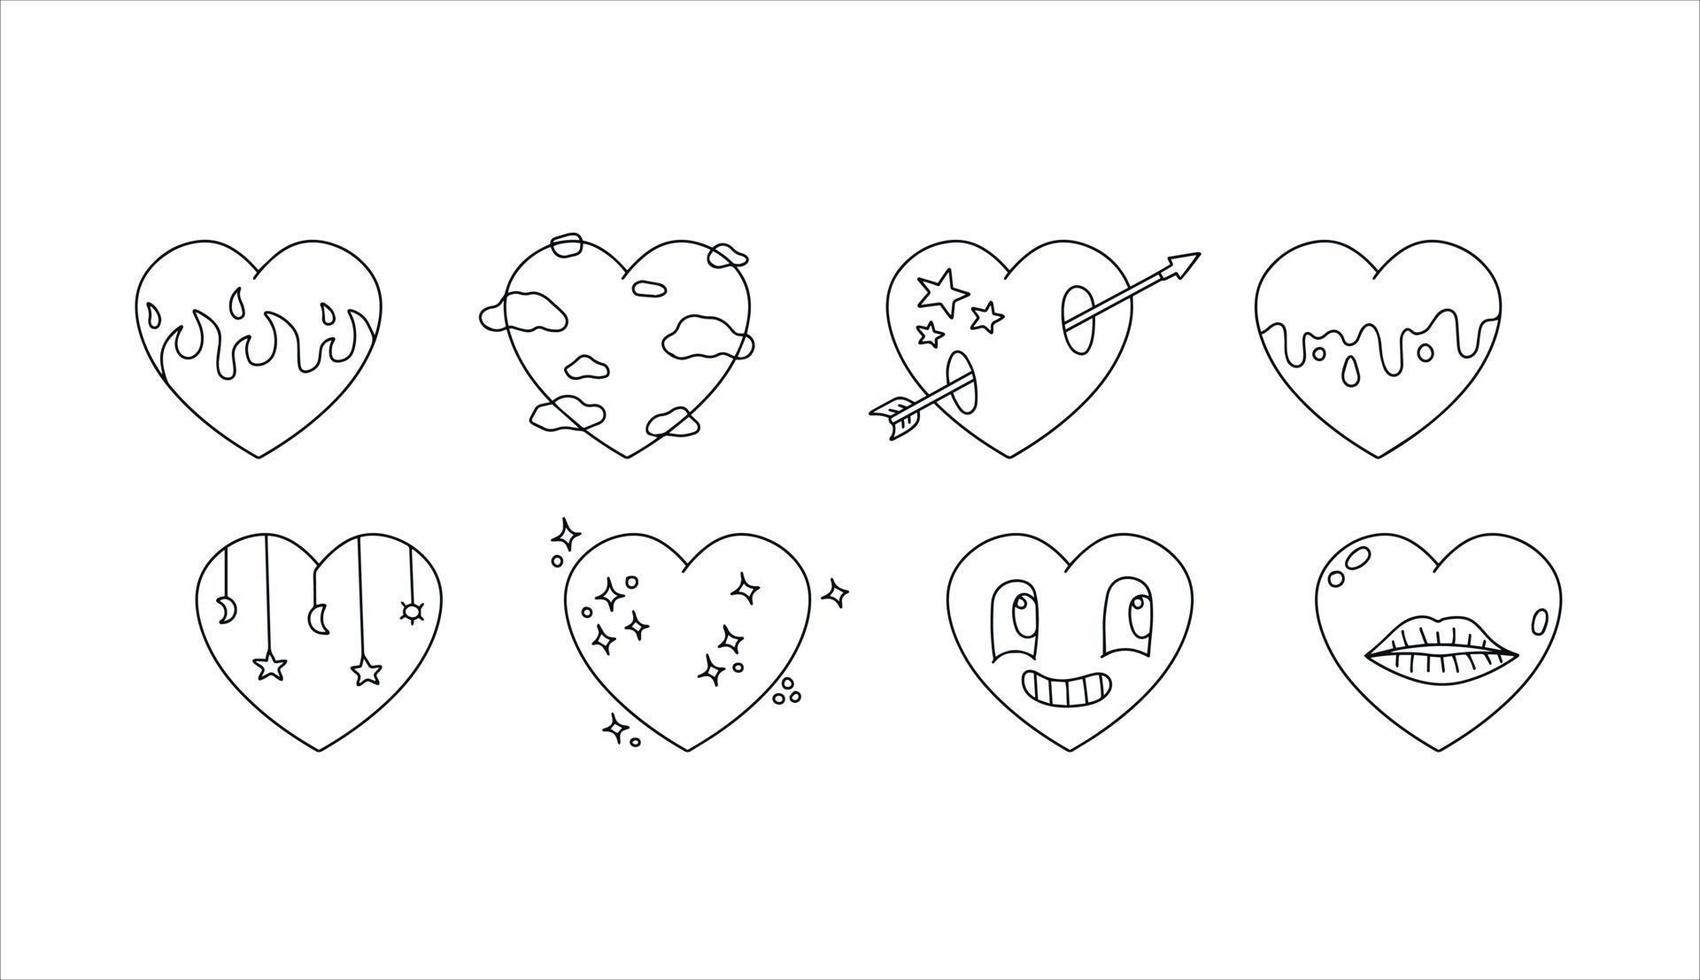 Set of hearts. Collection of retro vintage sticker. Hippie surreal icon of love. Cartoon flat vector illustrations isolated on white background. Bizarre psychedelic set